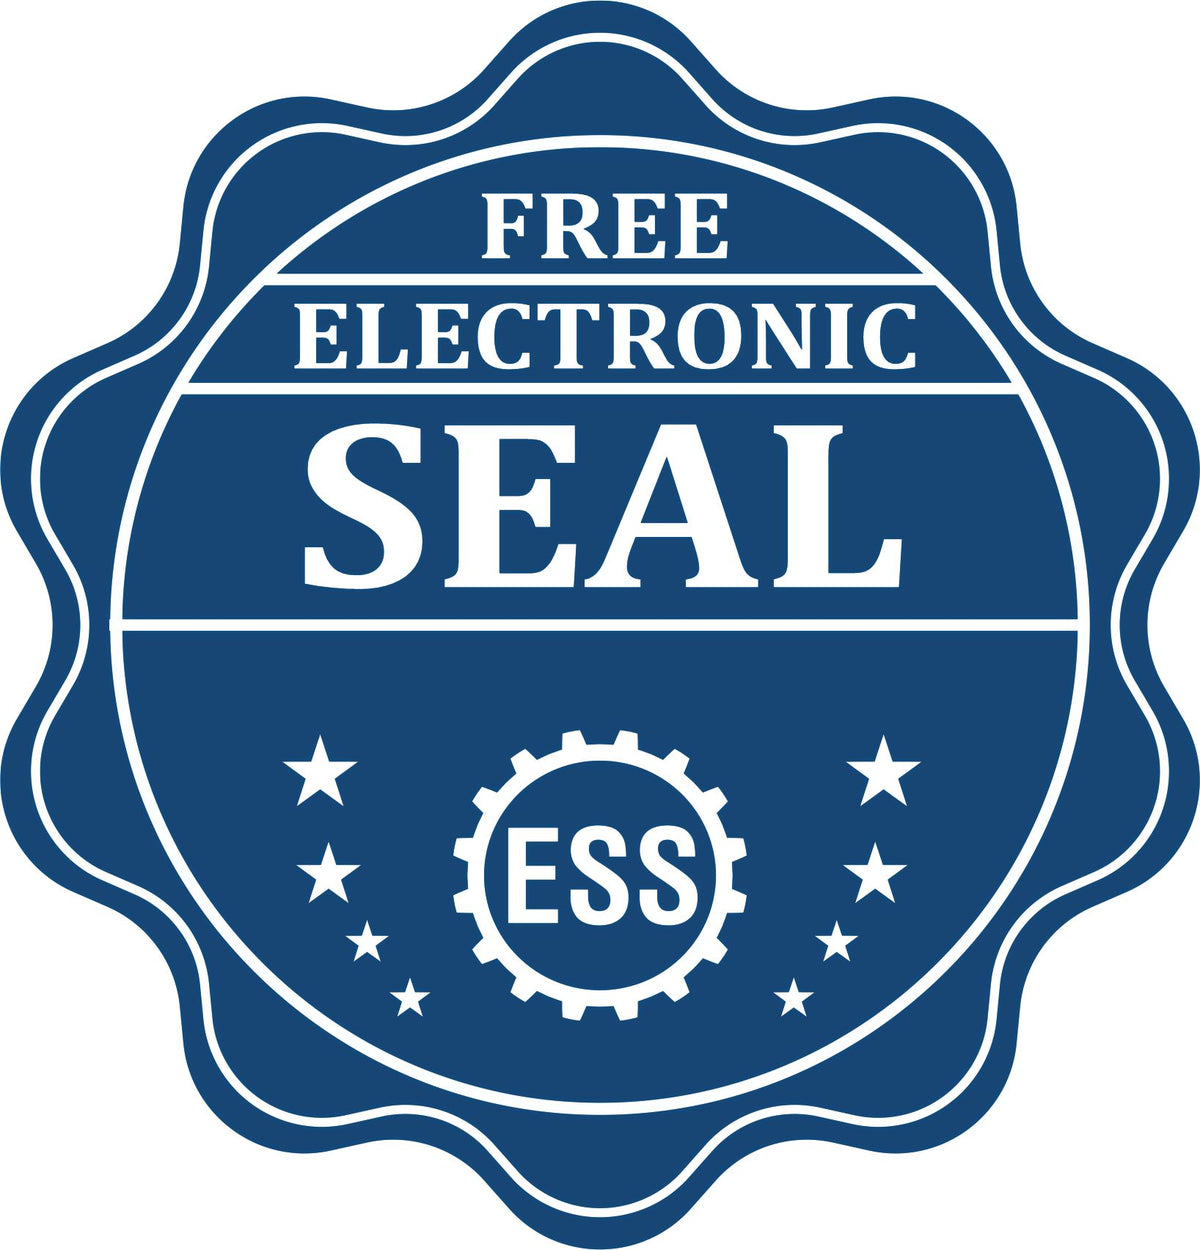 A badge showing a free electronic seal for the Super Slim Kentucky Notary Public Stamp with stars and the ESS gear on the emblem.